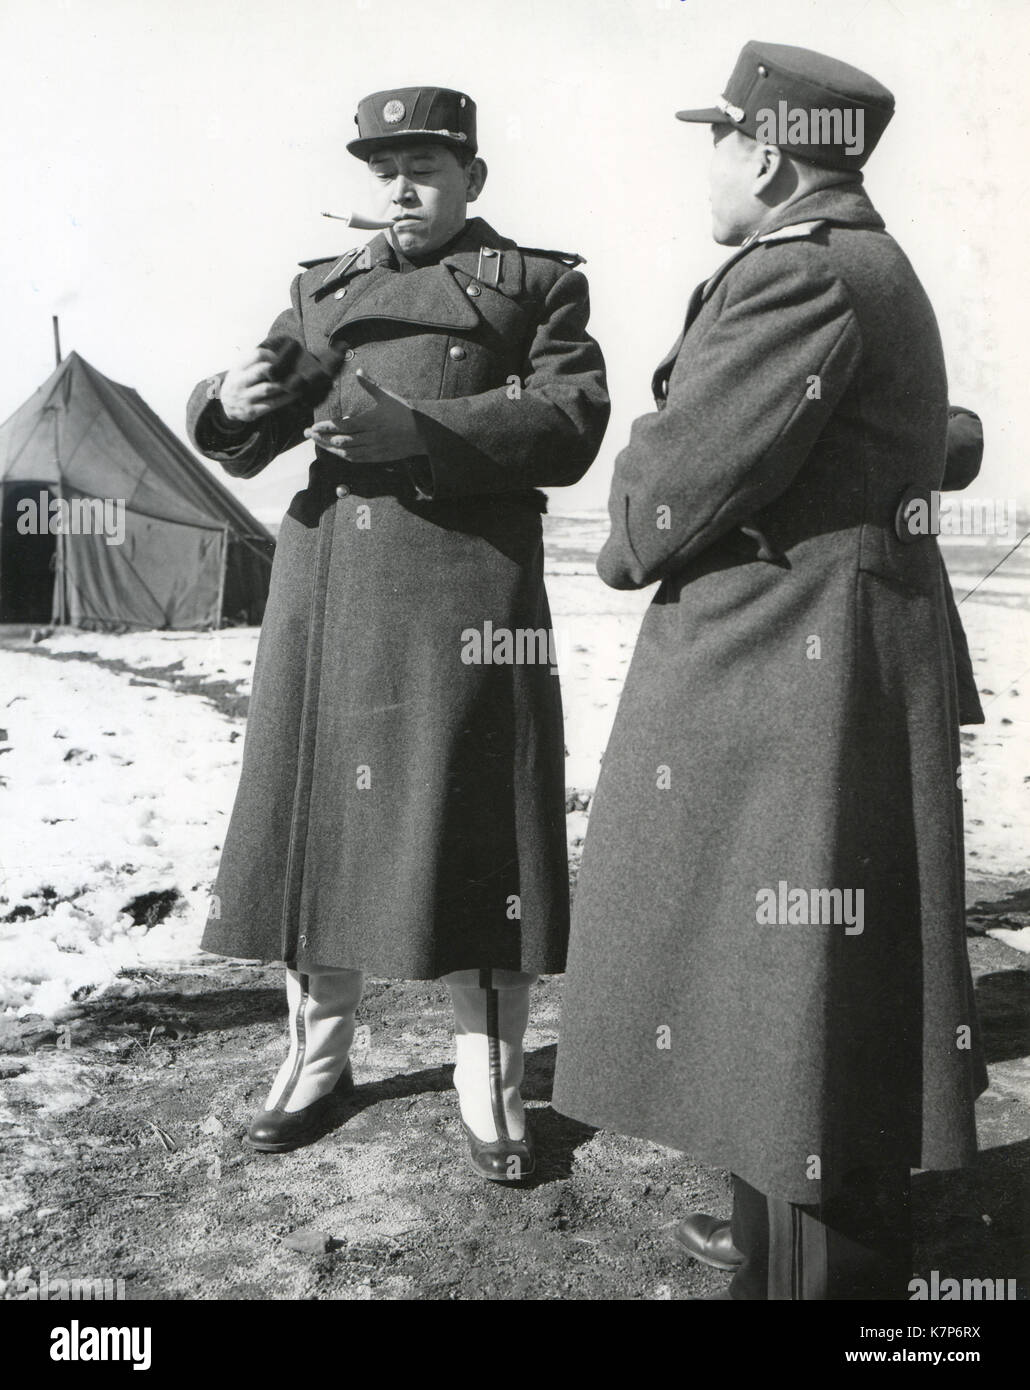 November 27, 1951, Panmunjom, Korea - Following a meeting with UN Delegation, at the conference site of  Military Armistice Negotiations between representatives of the Communist Forces,  and UN forces, Gen. Nam II (left) discussed the proceedings with an aide. Stock Photo